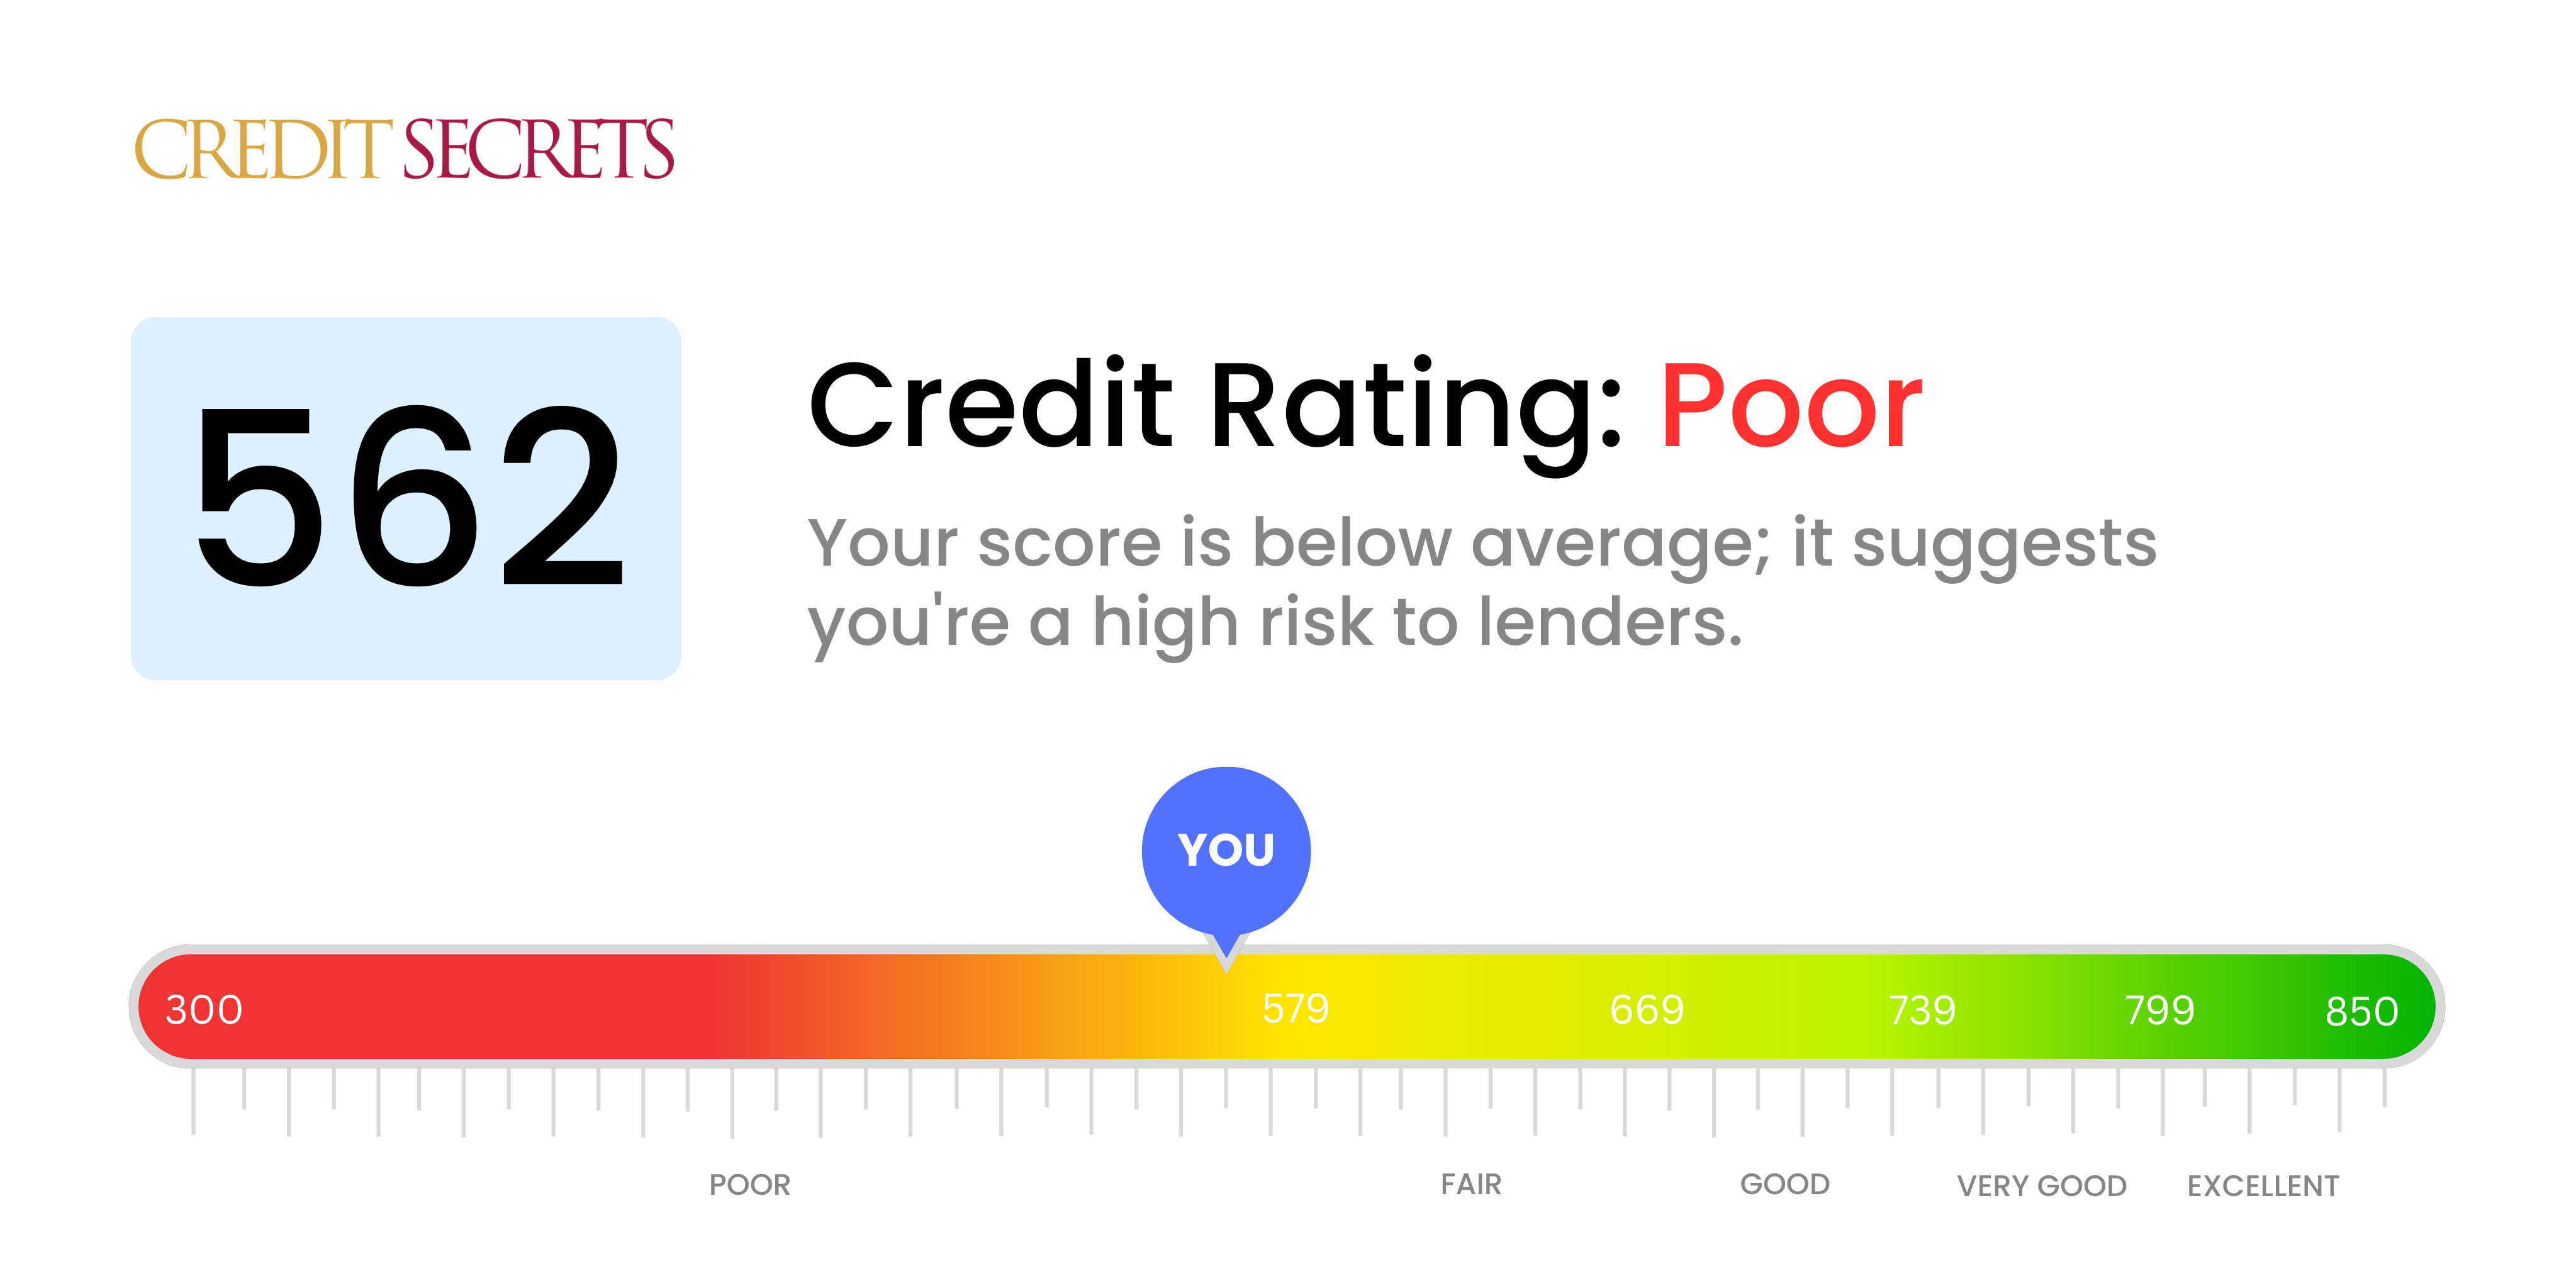 Is 562 a good credit score?